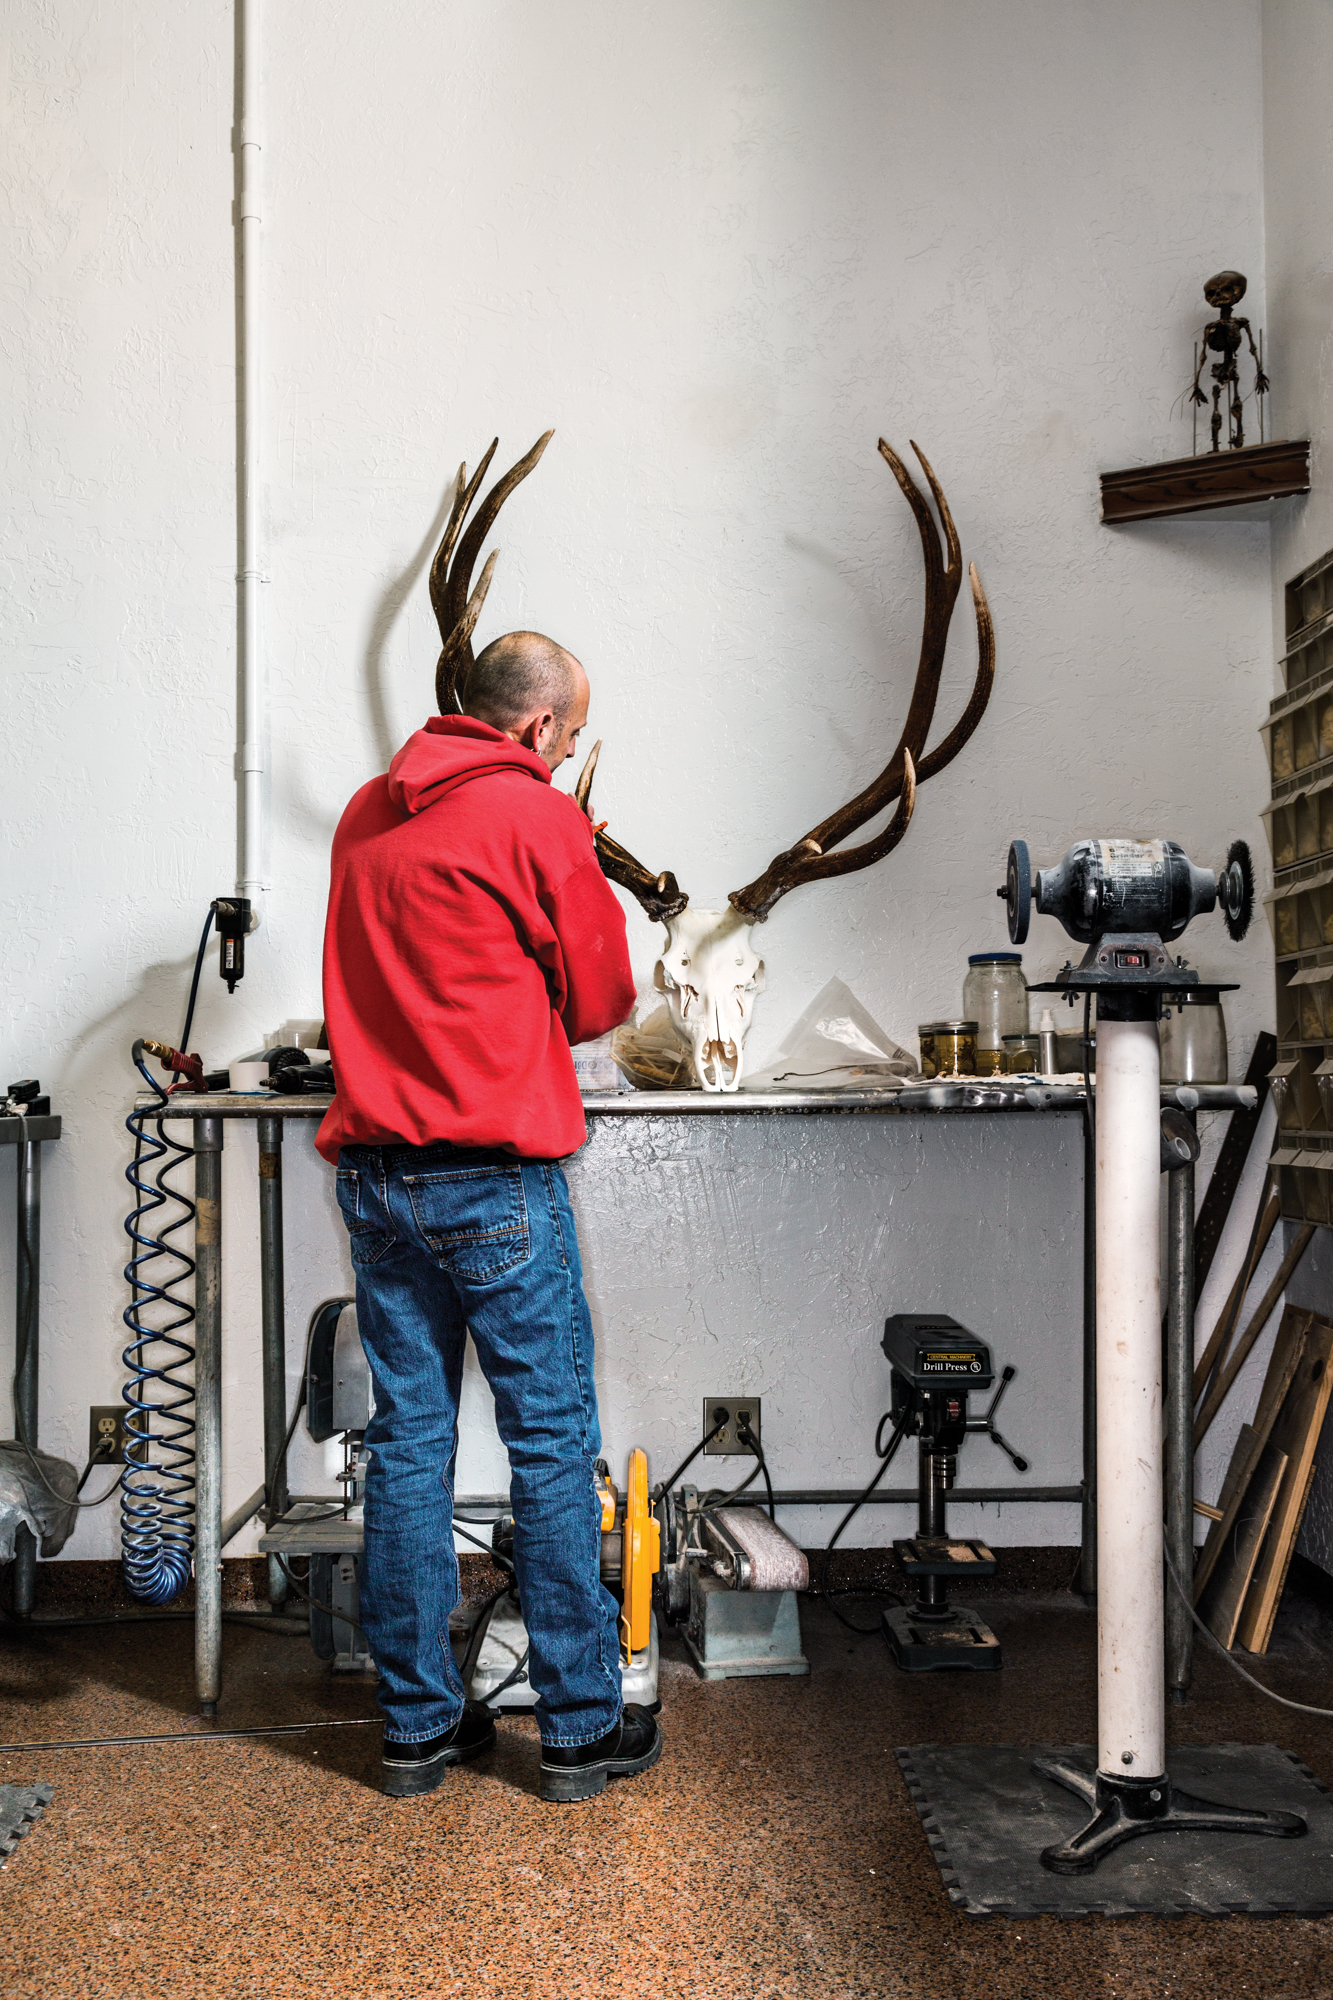 A man cleans an elk skull at a table.